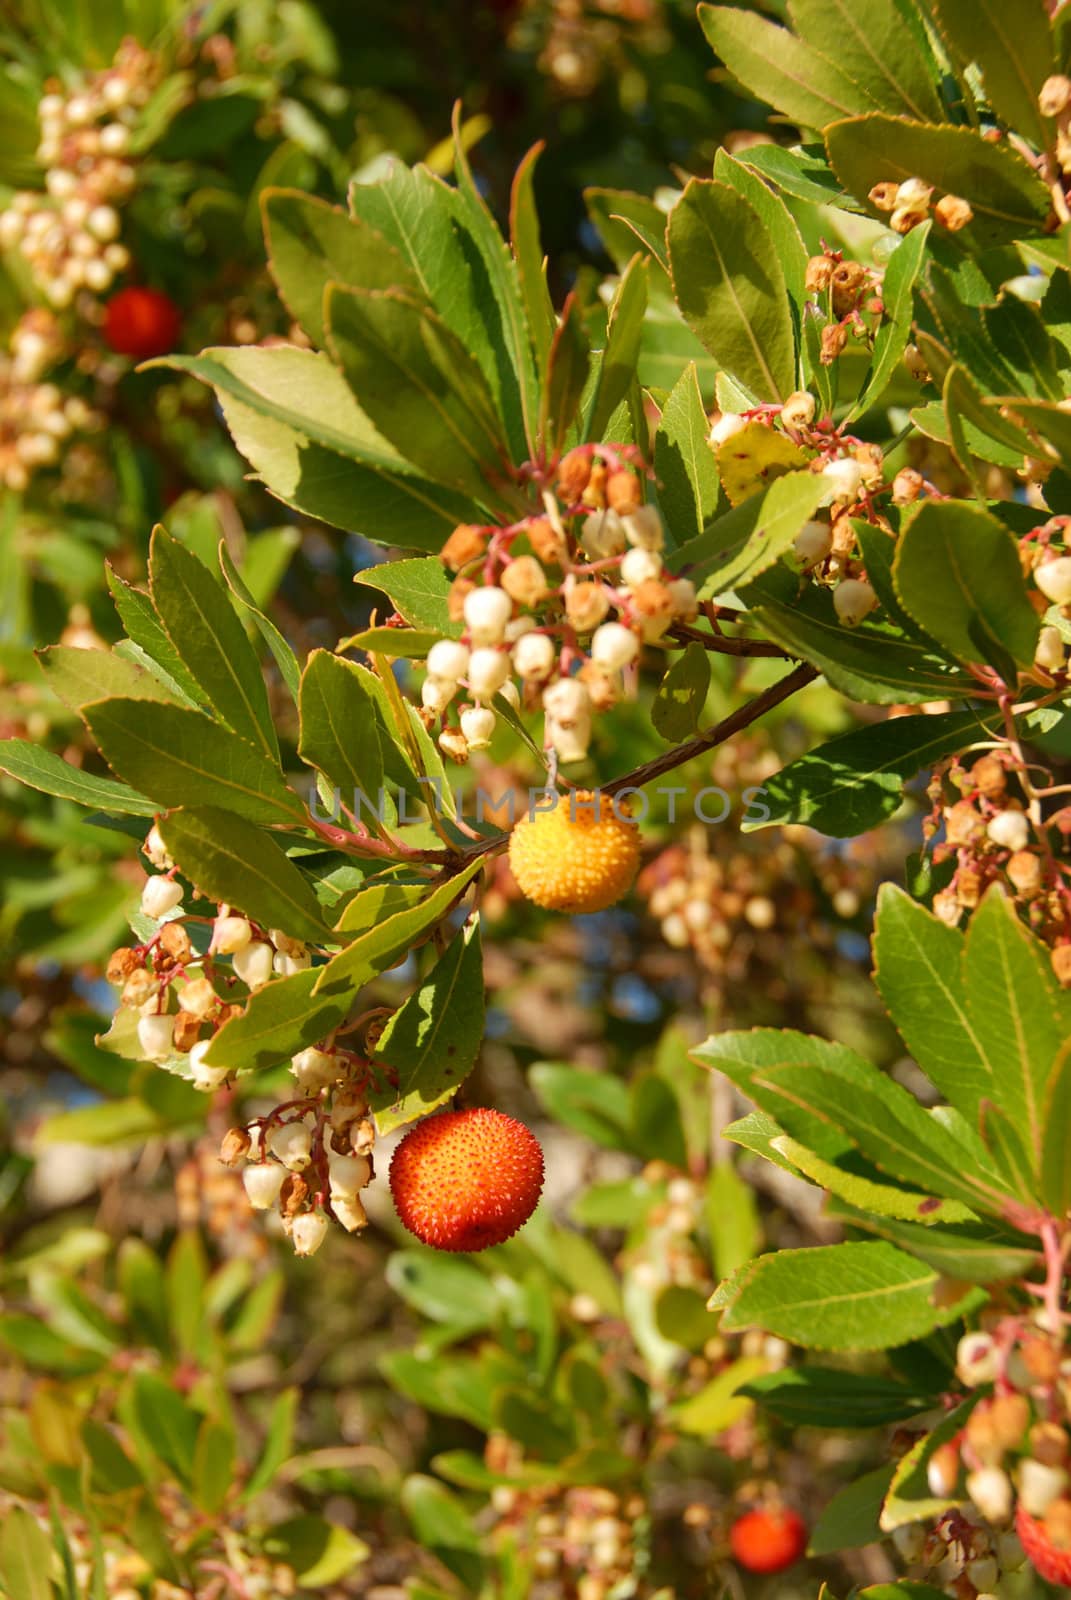 arbousier, tree in the south of France (Arbustus unedo). focus on the red fruit.